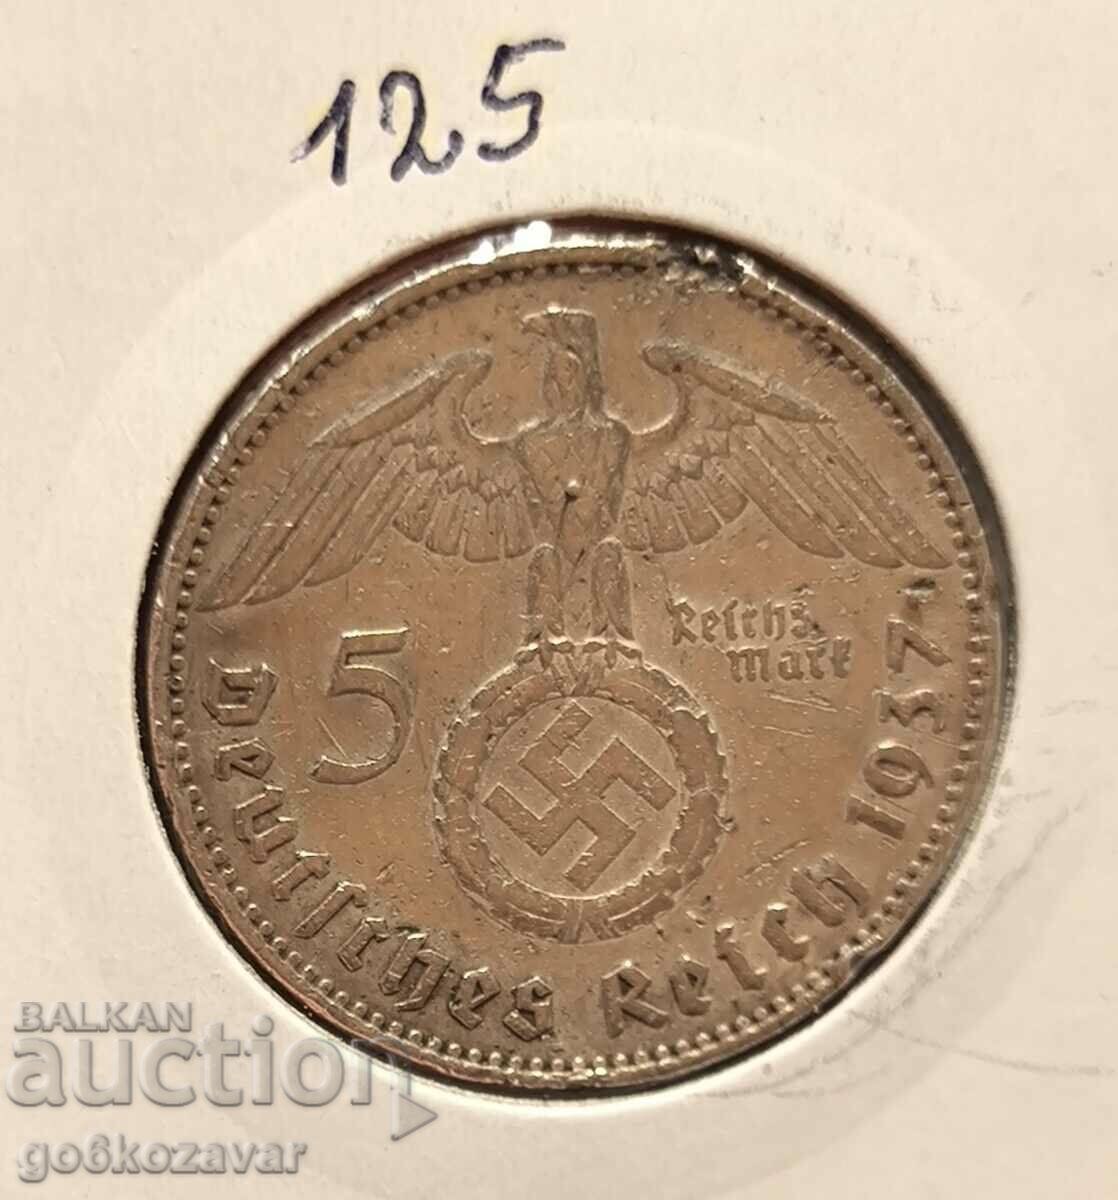 Germany Third Reich 5 stamps 1937 Silver!